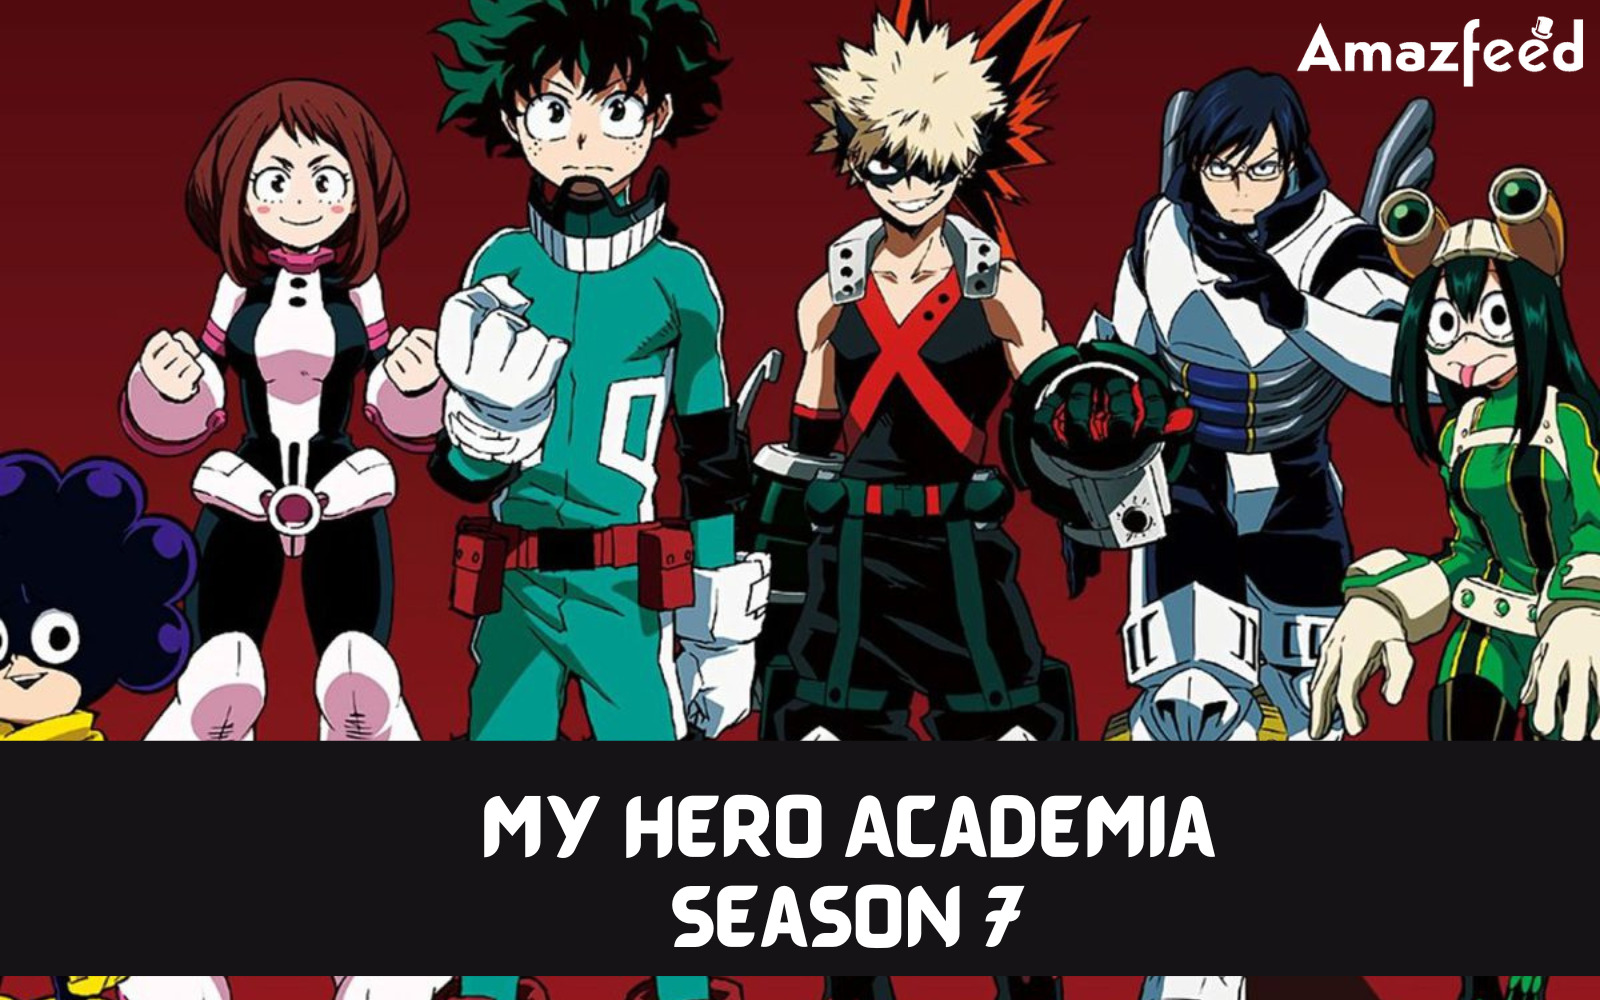 Is There Any Trailer For My Hero Academia Season 7